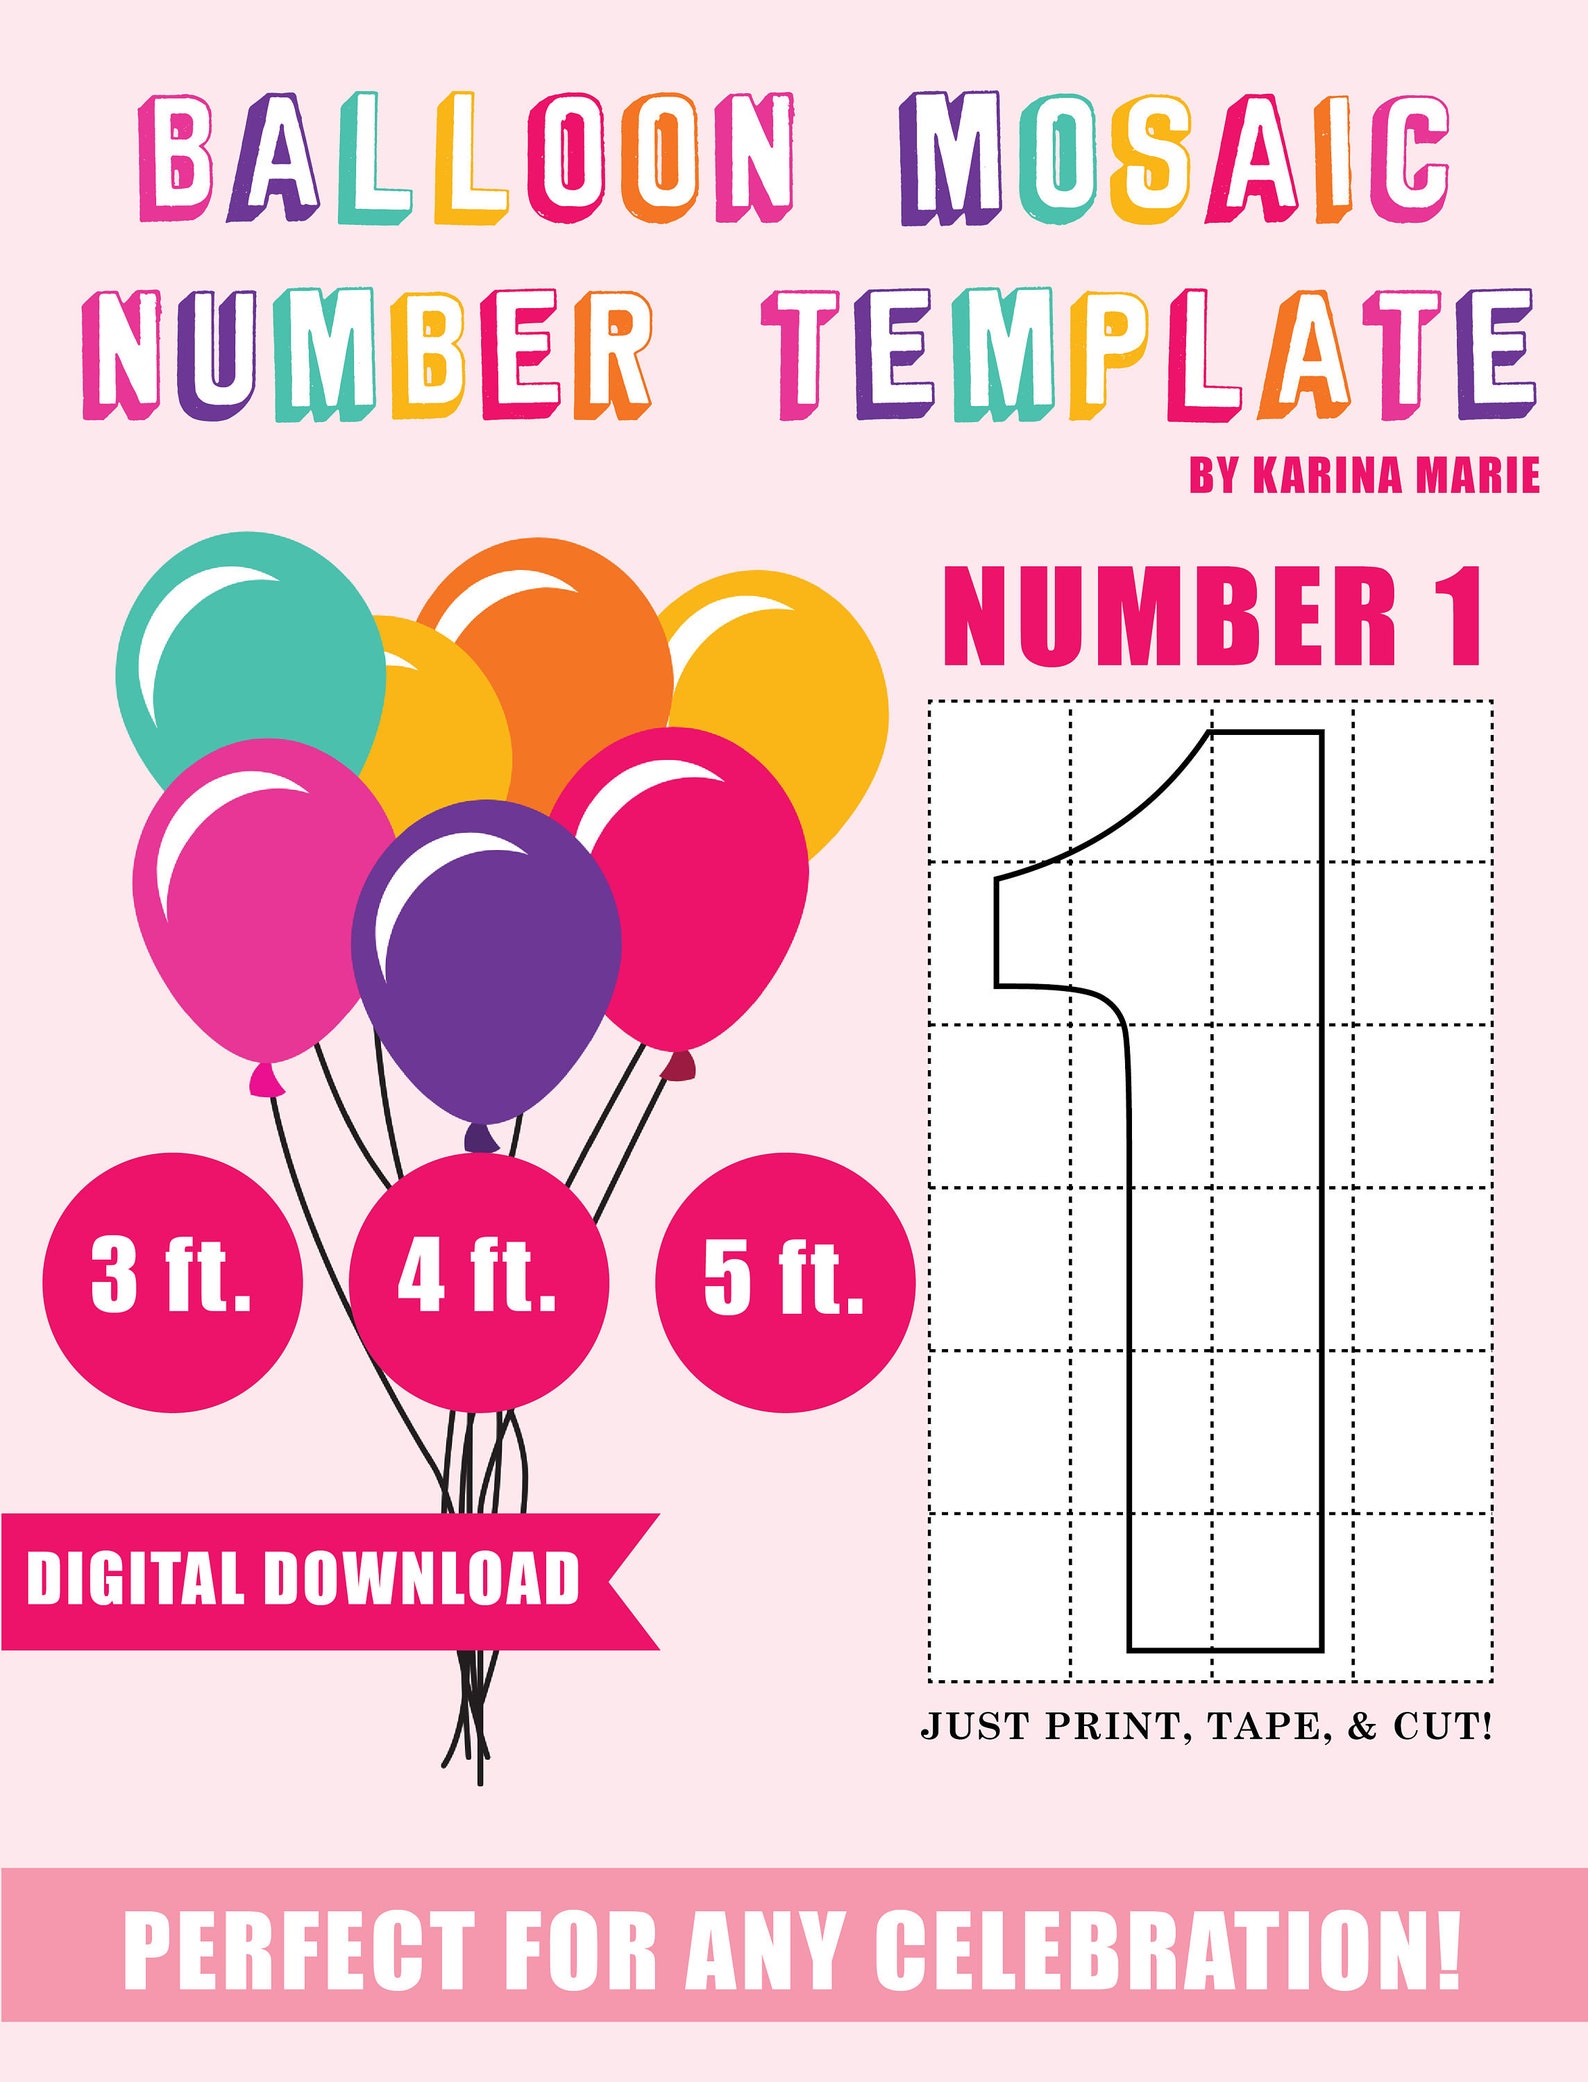 Balloon Mosaic Number Template / Number 1 / DIY Balloon Number Etsy